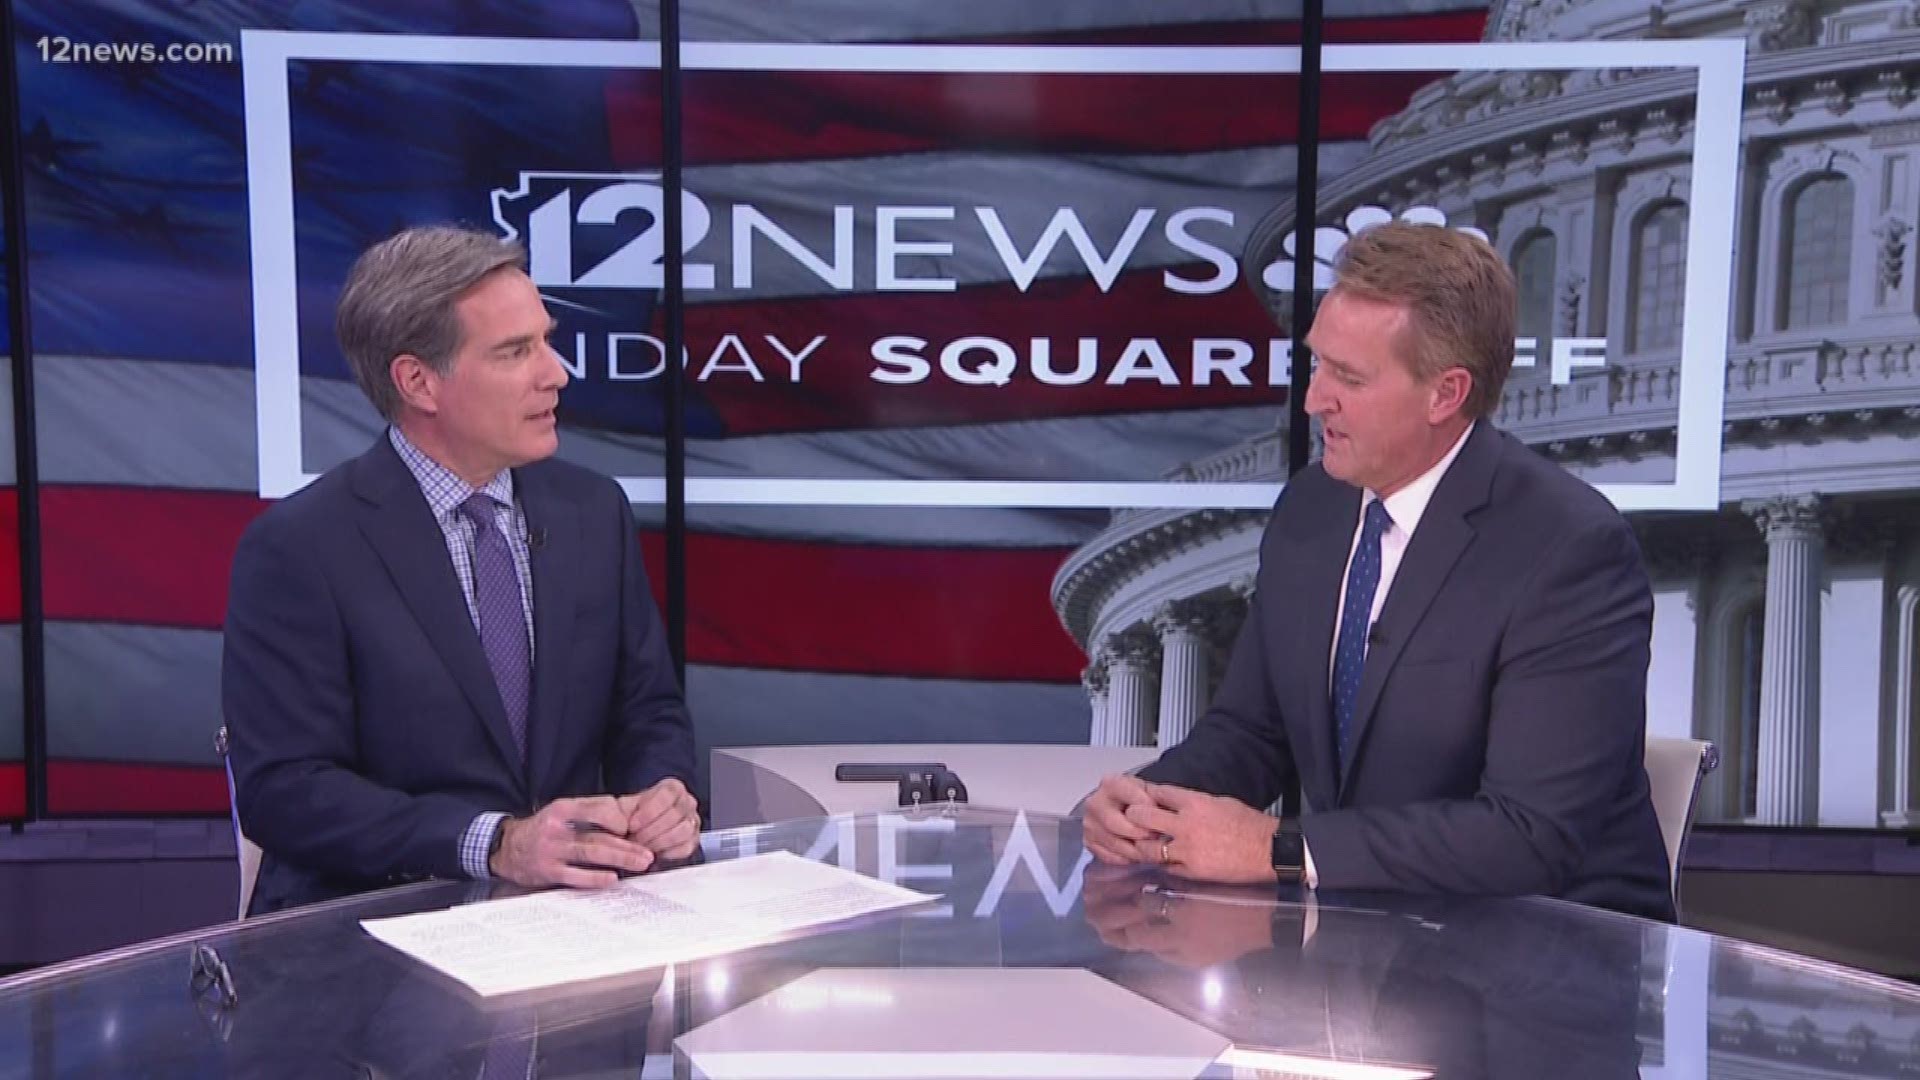 Retired Senator Jeff Flake spoke to 12 News and addressed the rumors that he would be running for president.